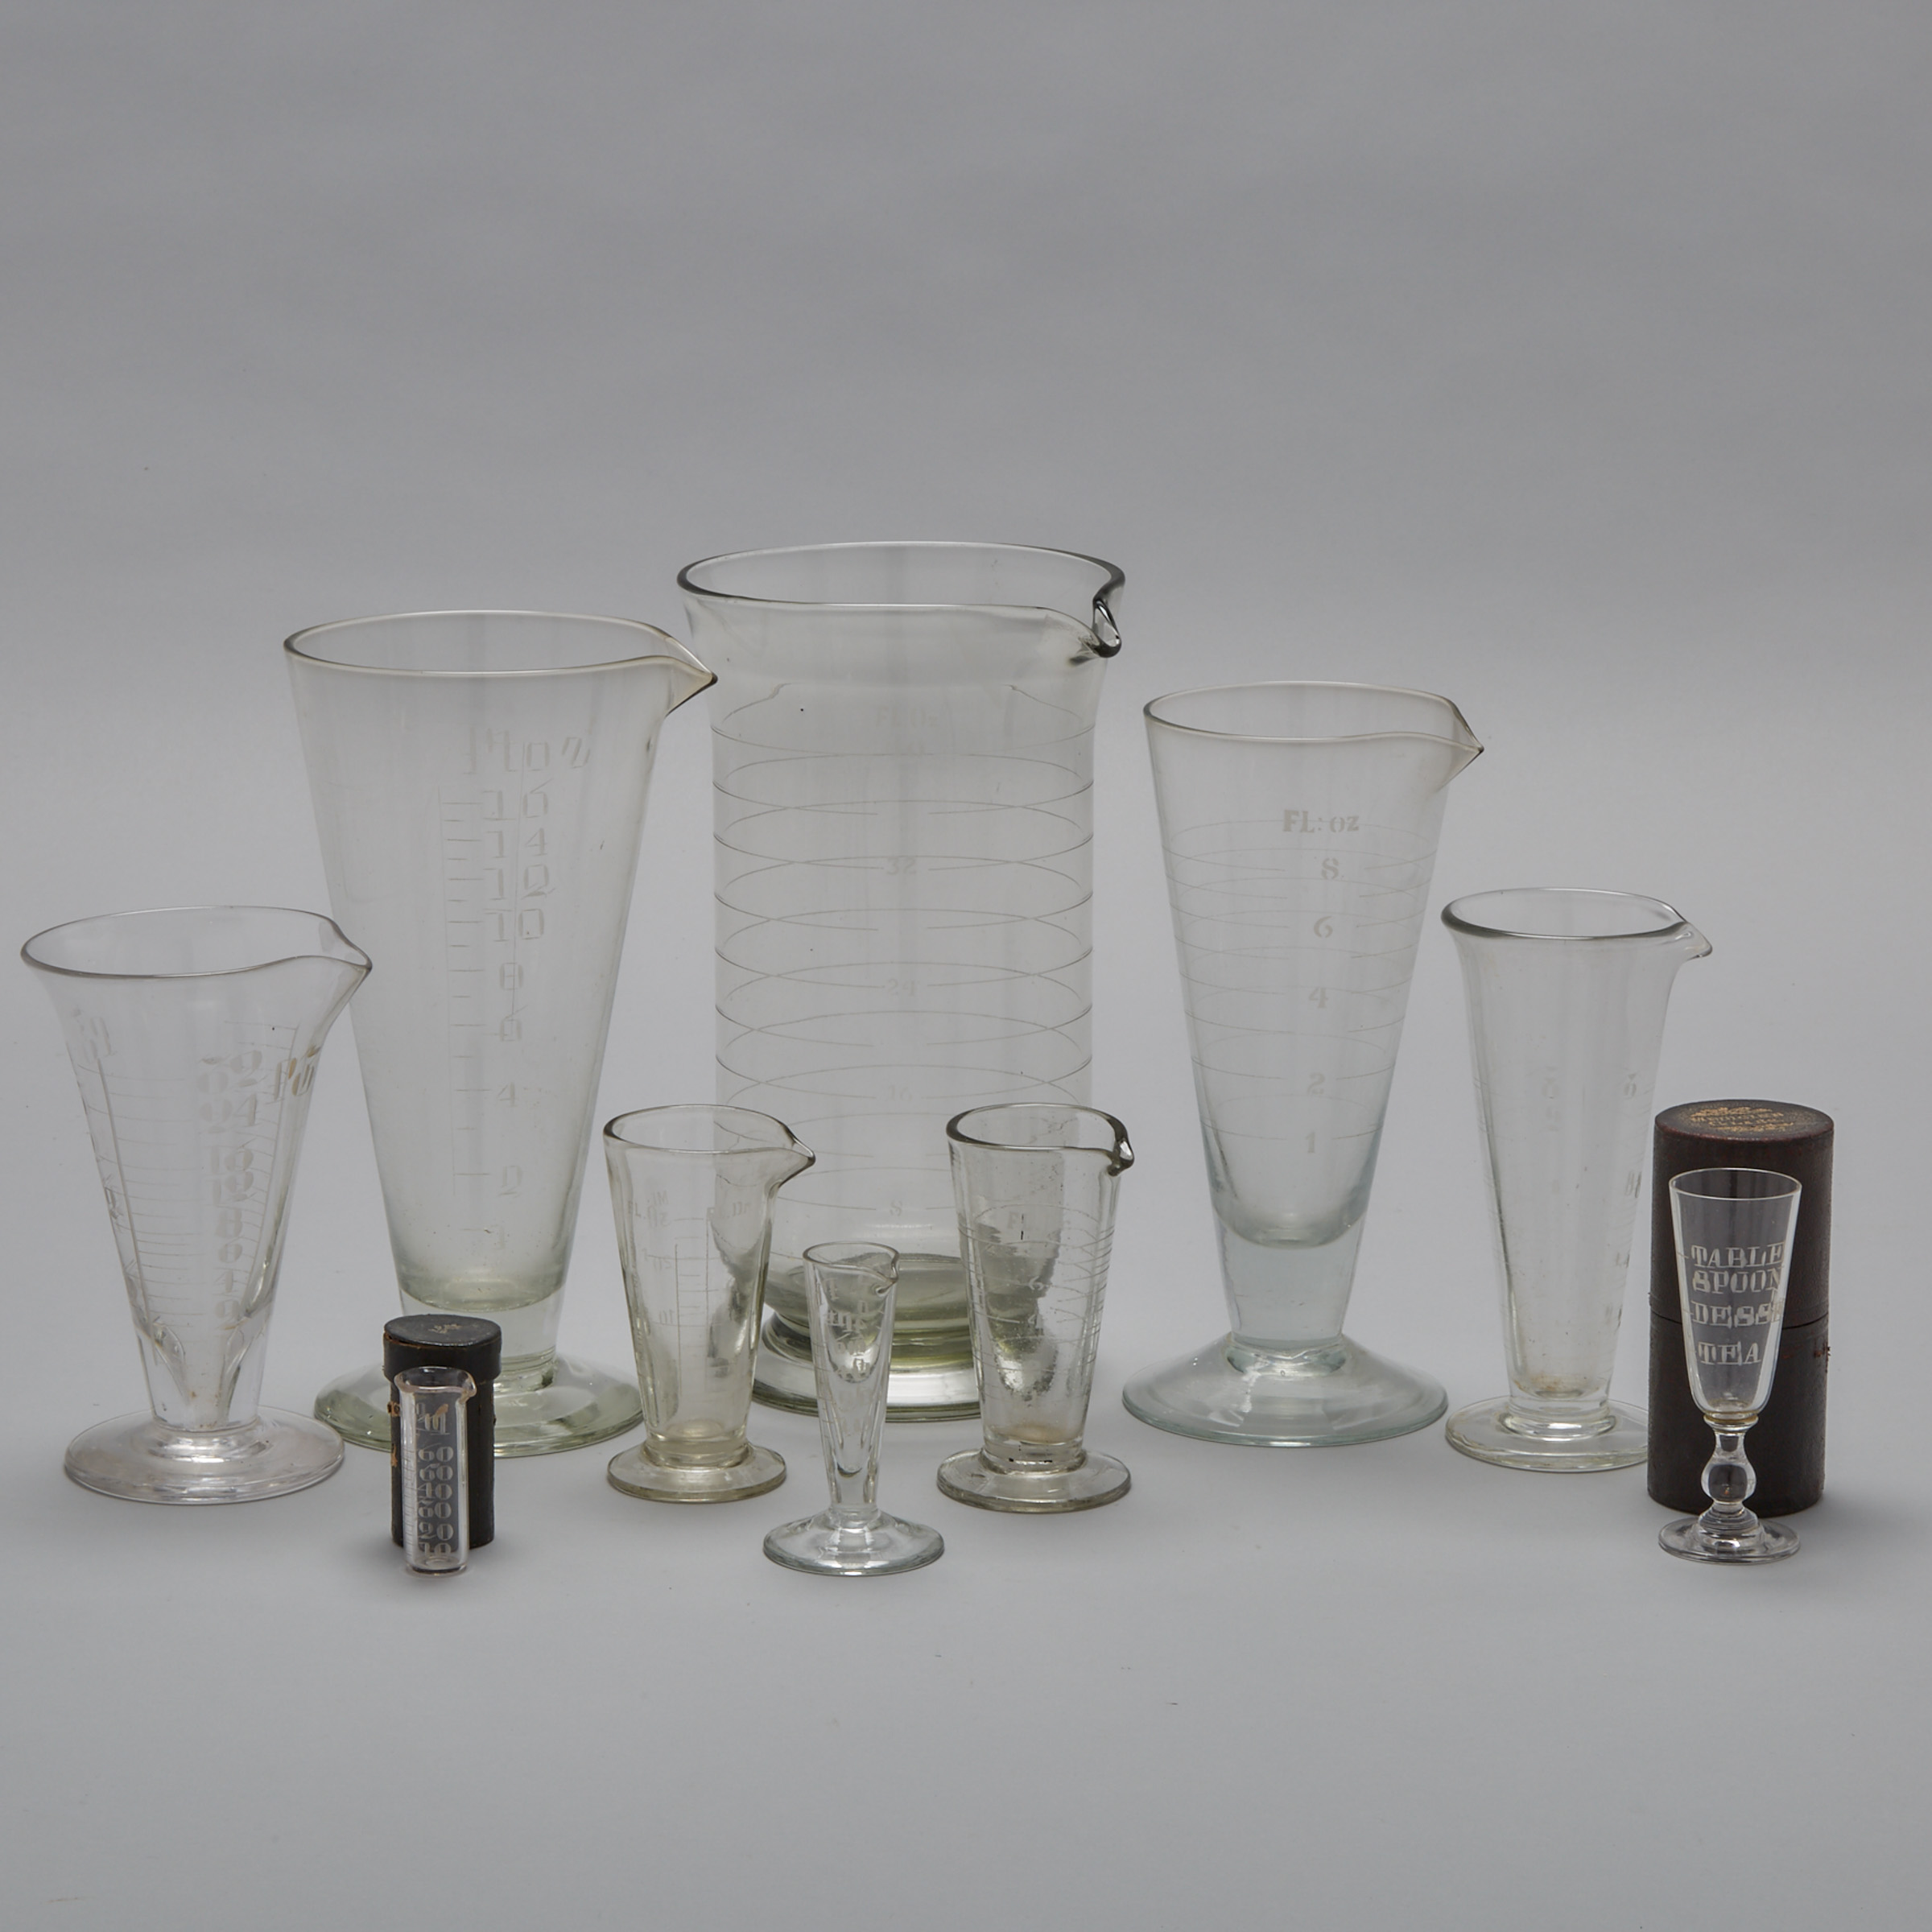 Group of Ten Pharmaceutical Glass Graduated Beakers and Vials, 19th/early 20th century